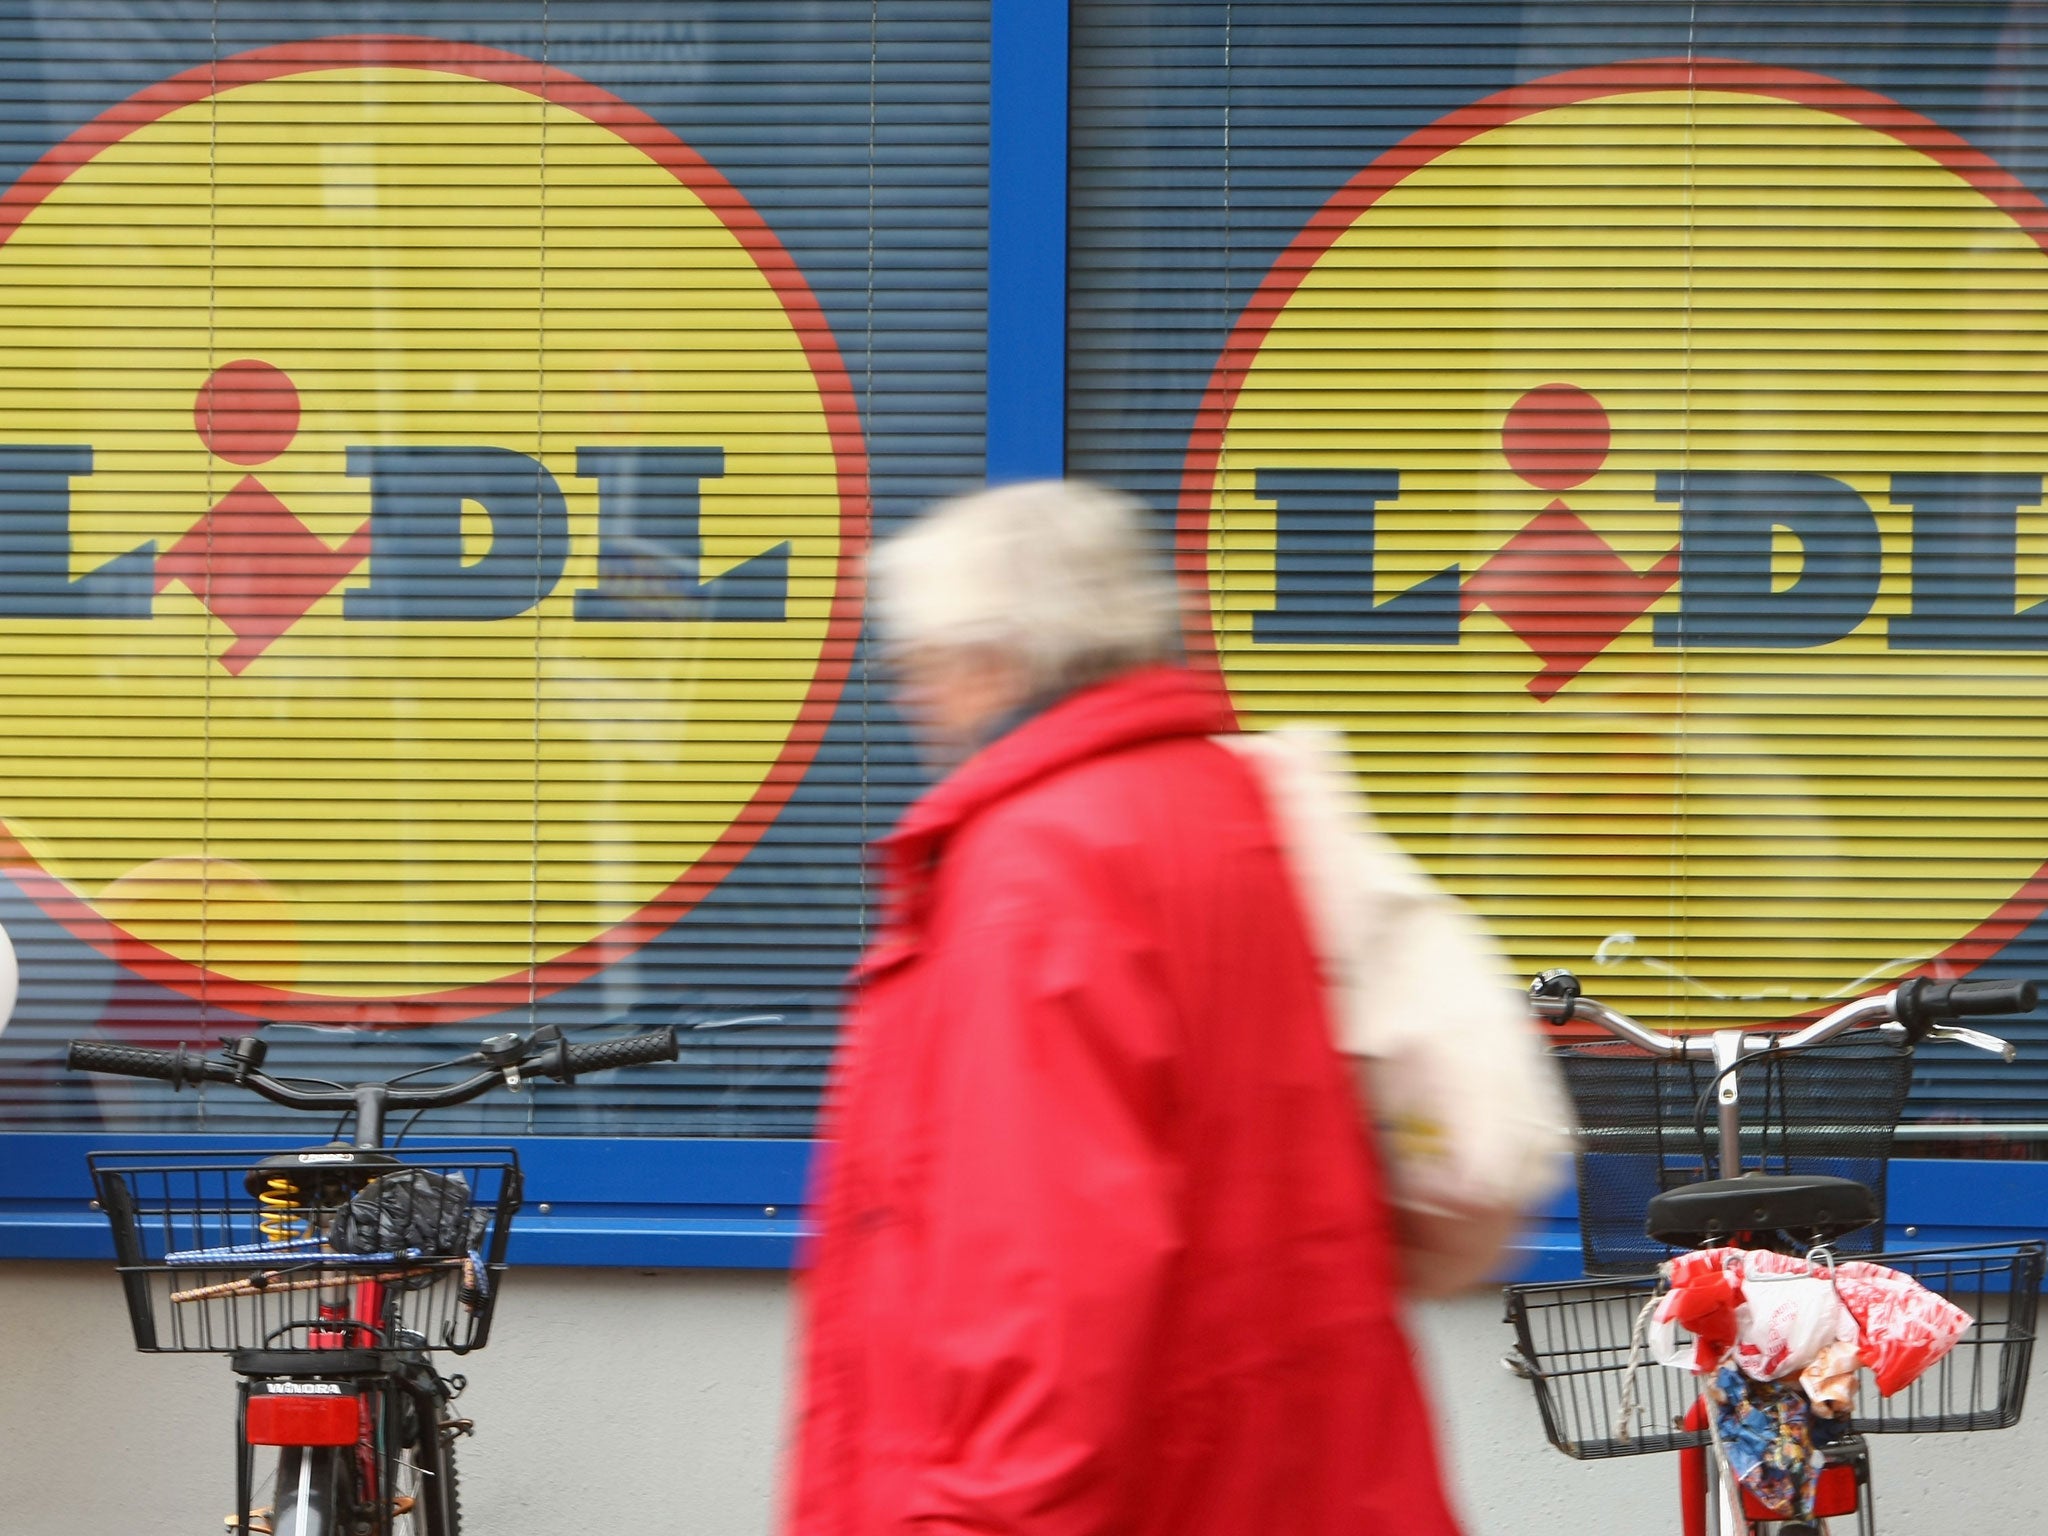 Super-discounters Aldi and Lidl are luring customers away from Big Four